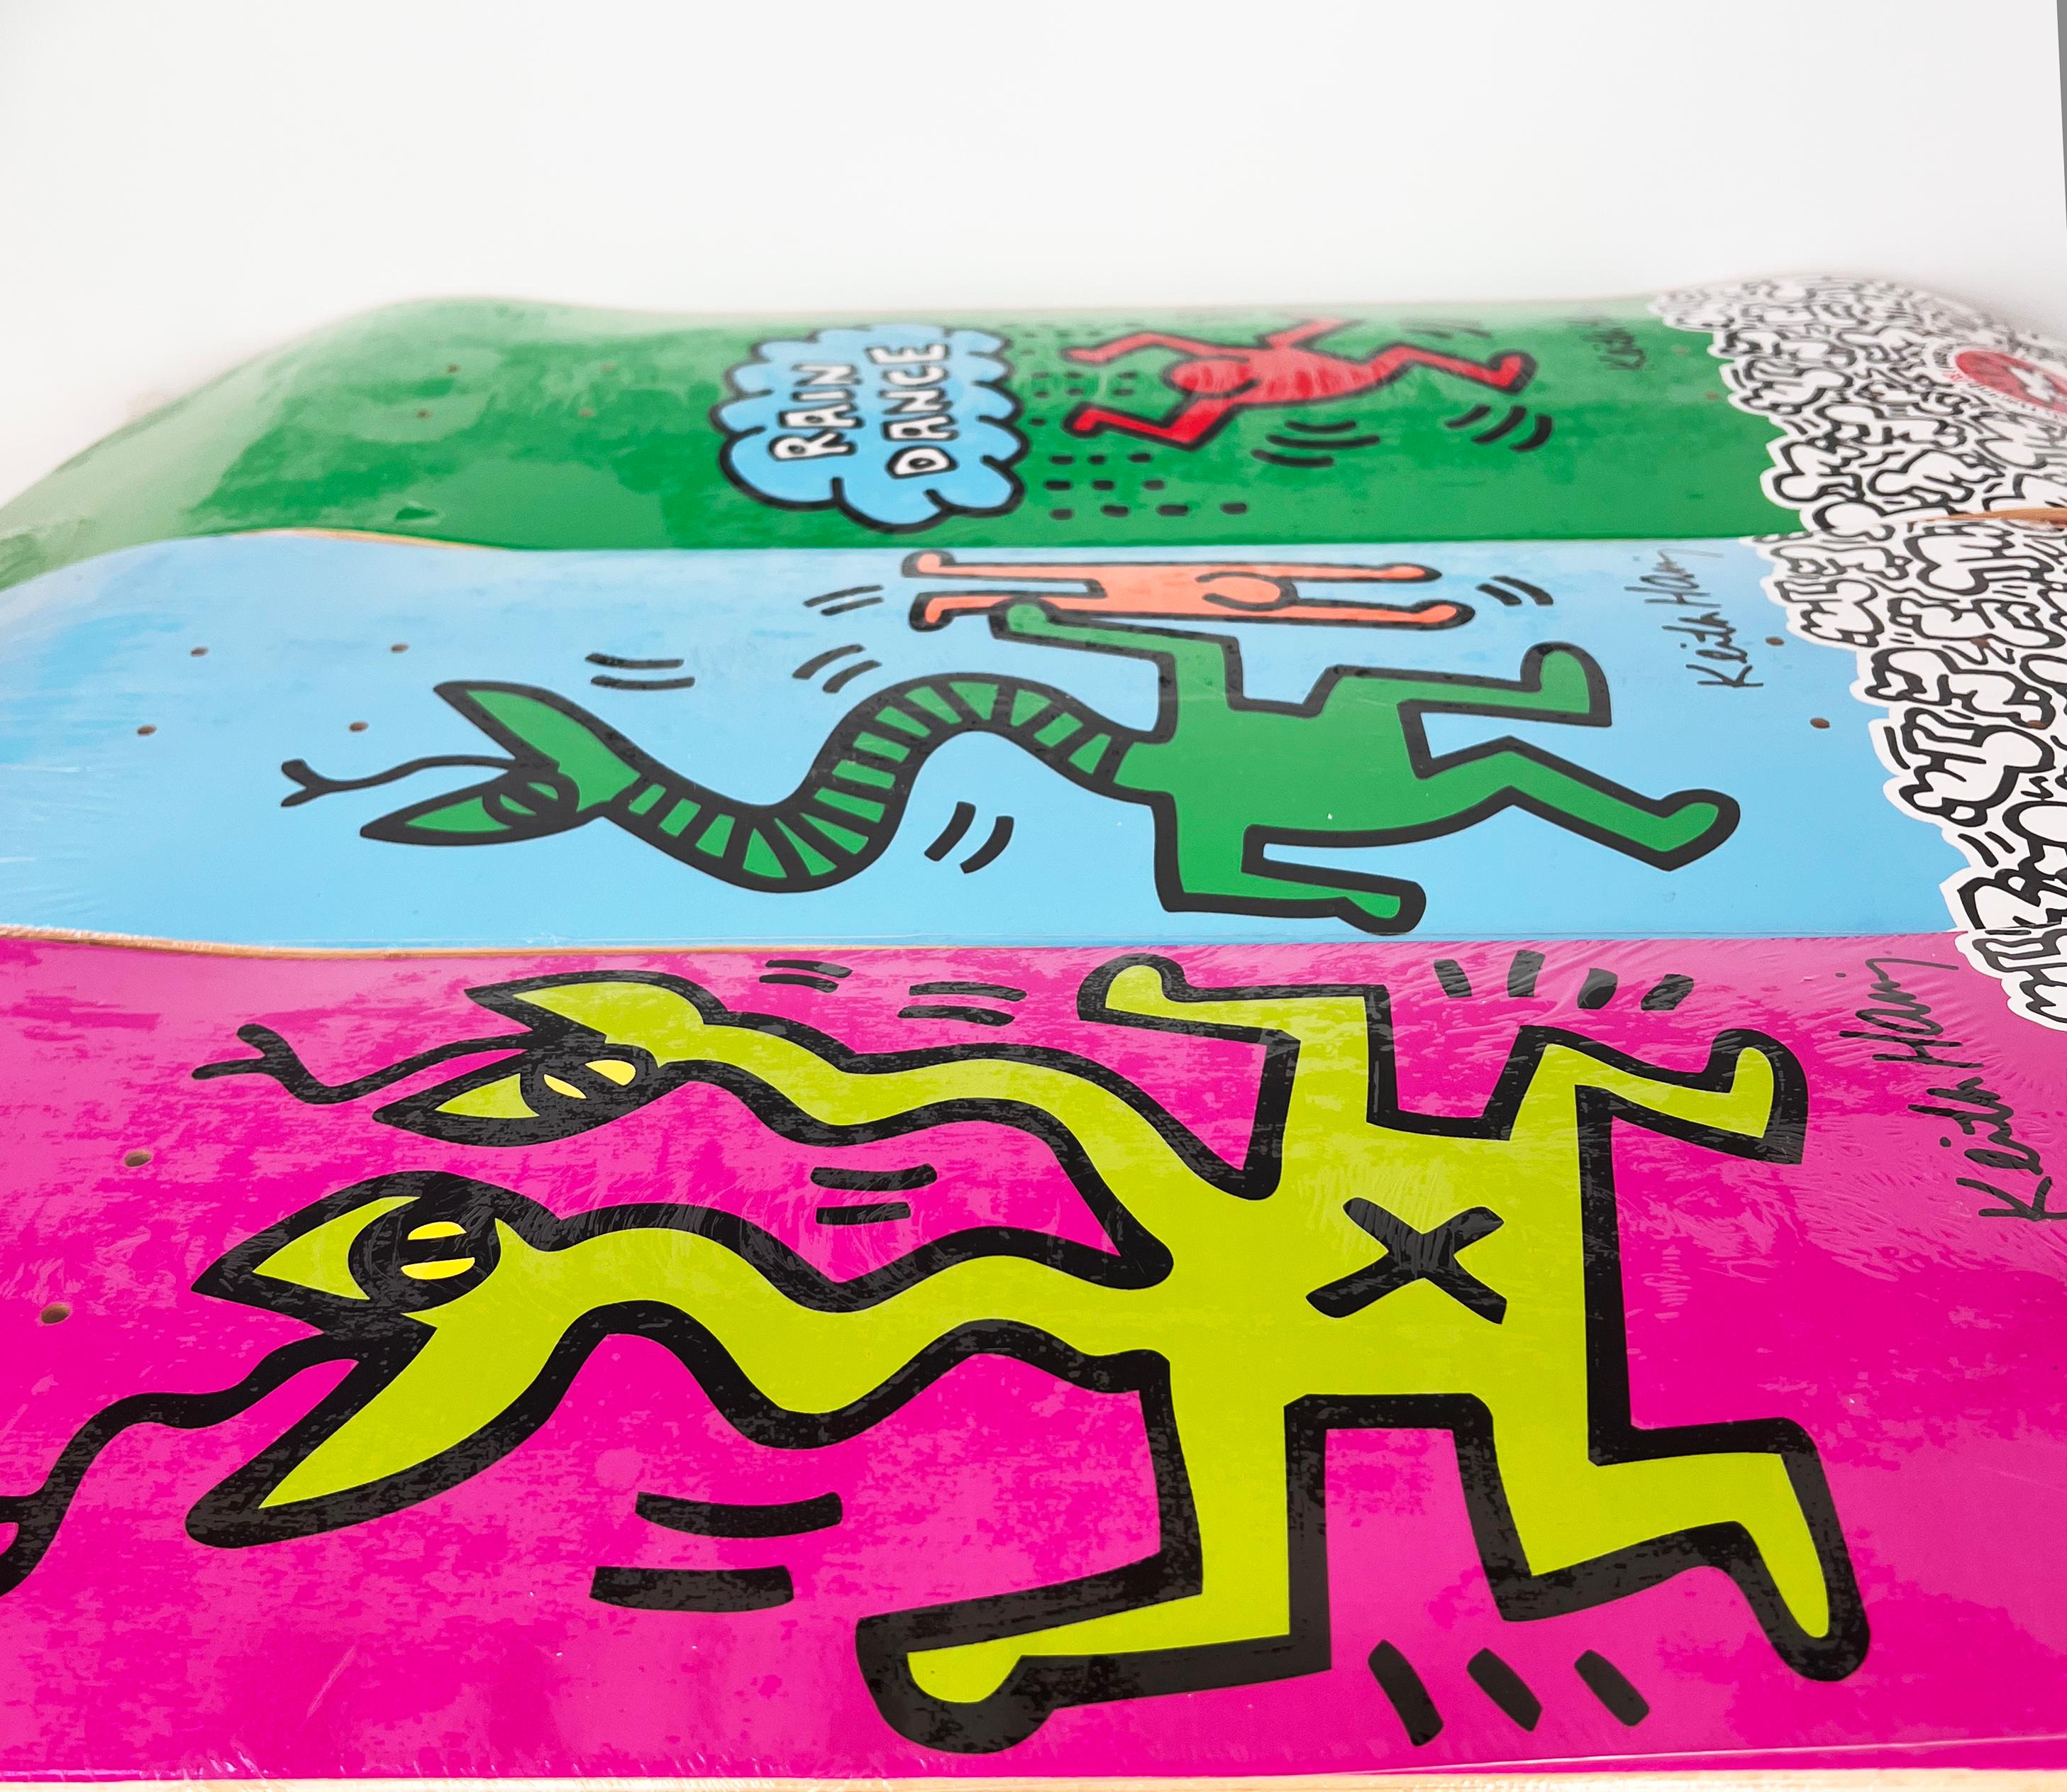 Keith Haring Skateboard Deck set of 3 works (Keith Haring skate decks) - Pop Art Sculpture by (after) Keith Haring